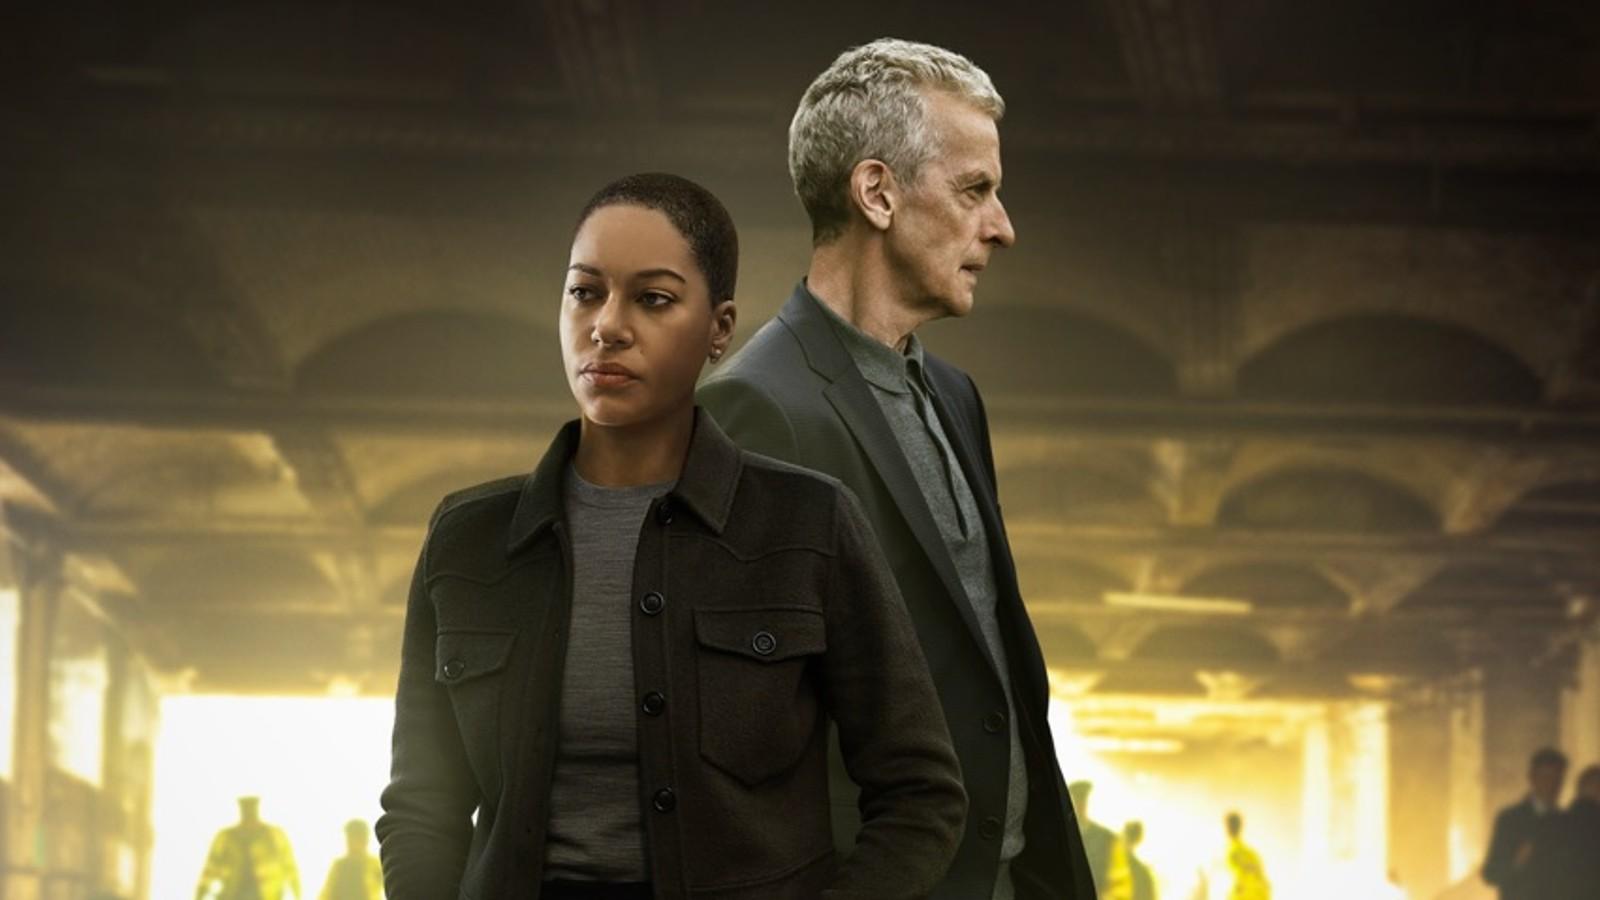 Cush Jumbo and Peter Capaldi investigating the case in Criminal Record.